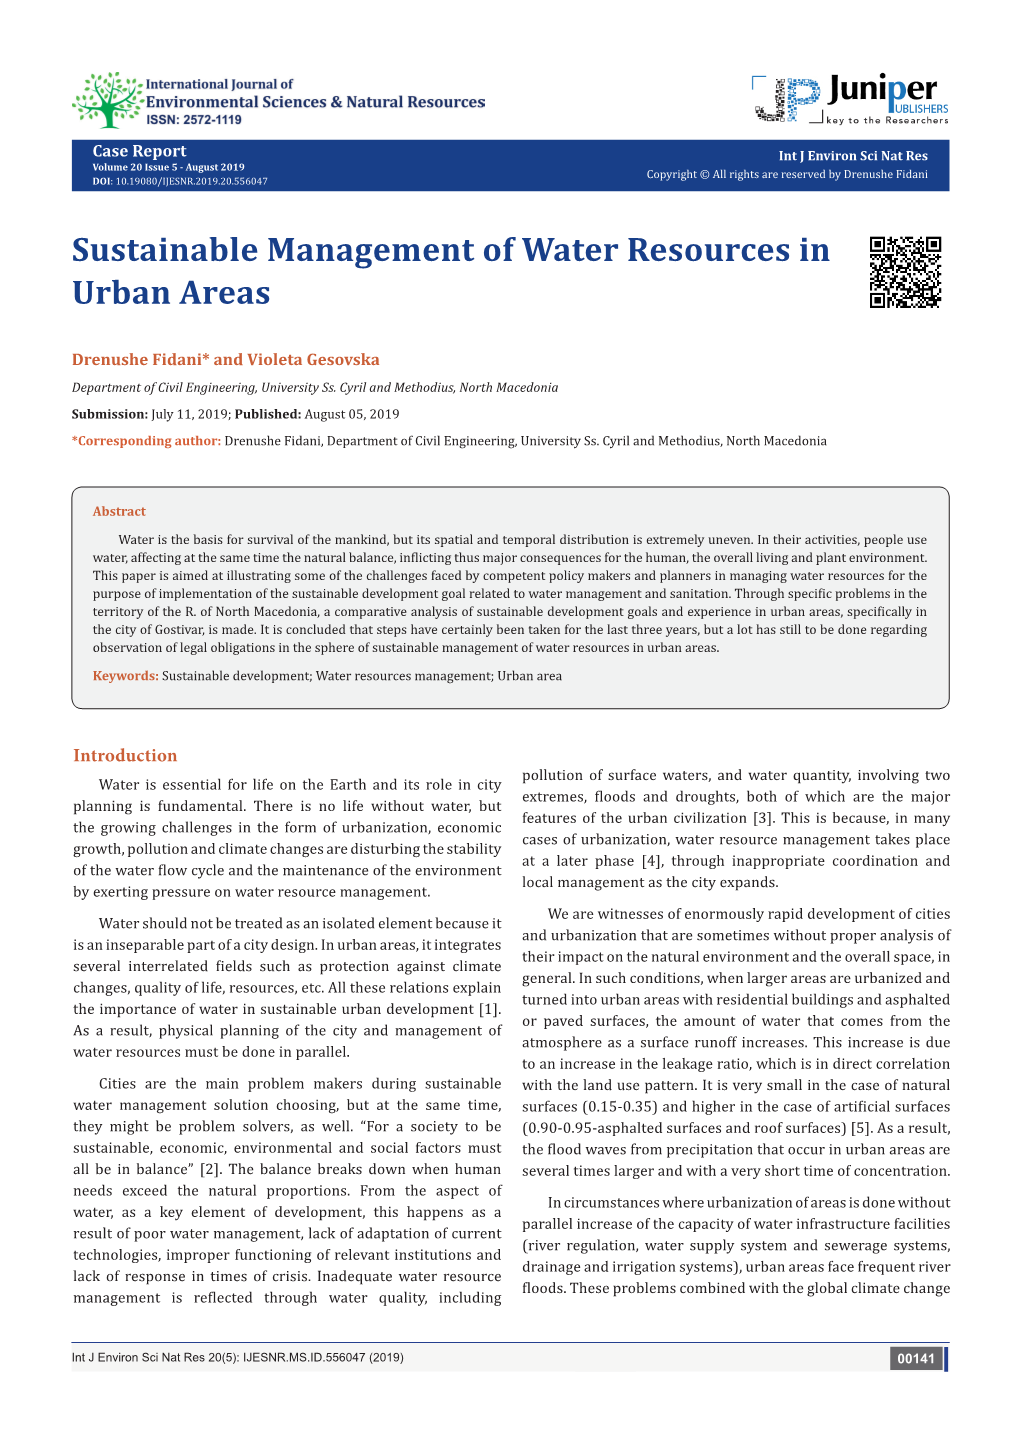 Sustainable Management of Water Resources in Urban Areas